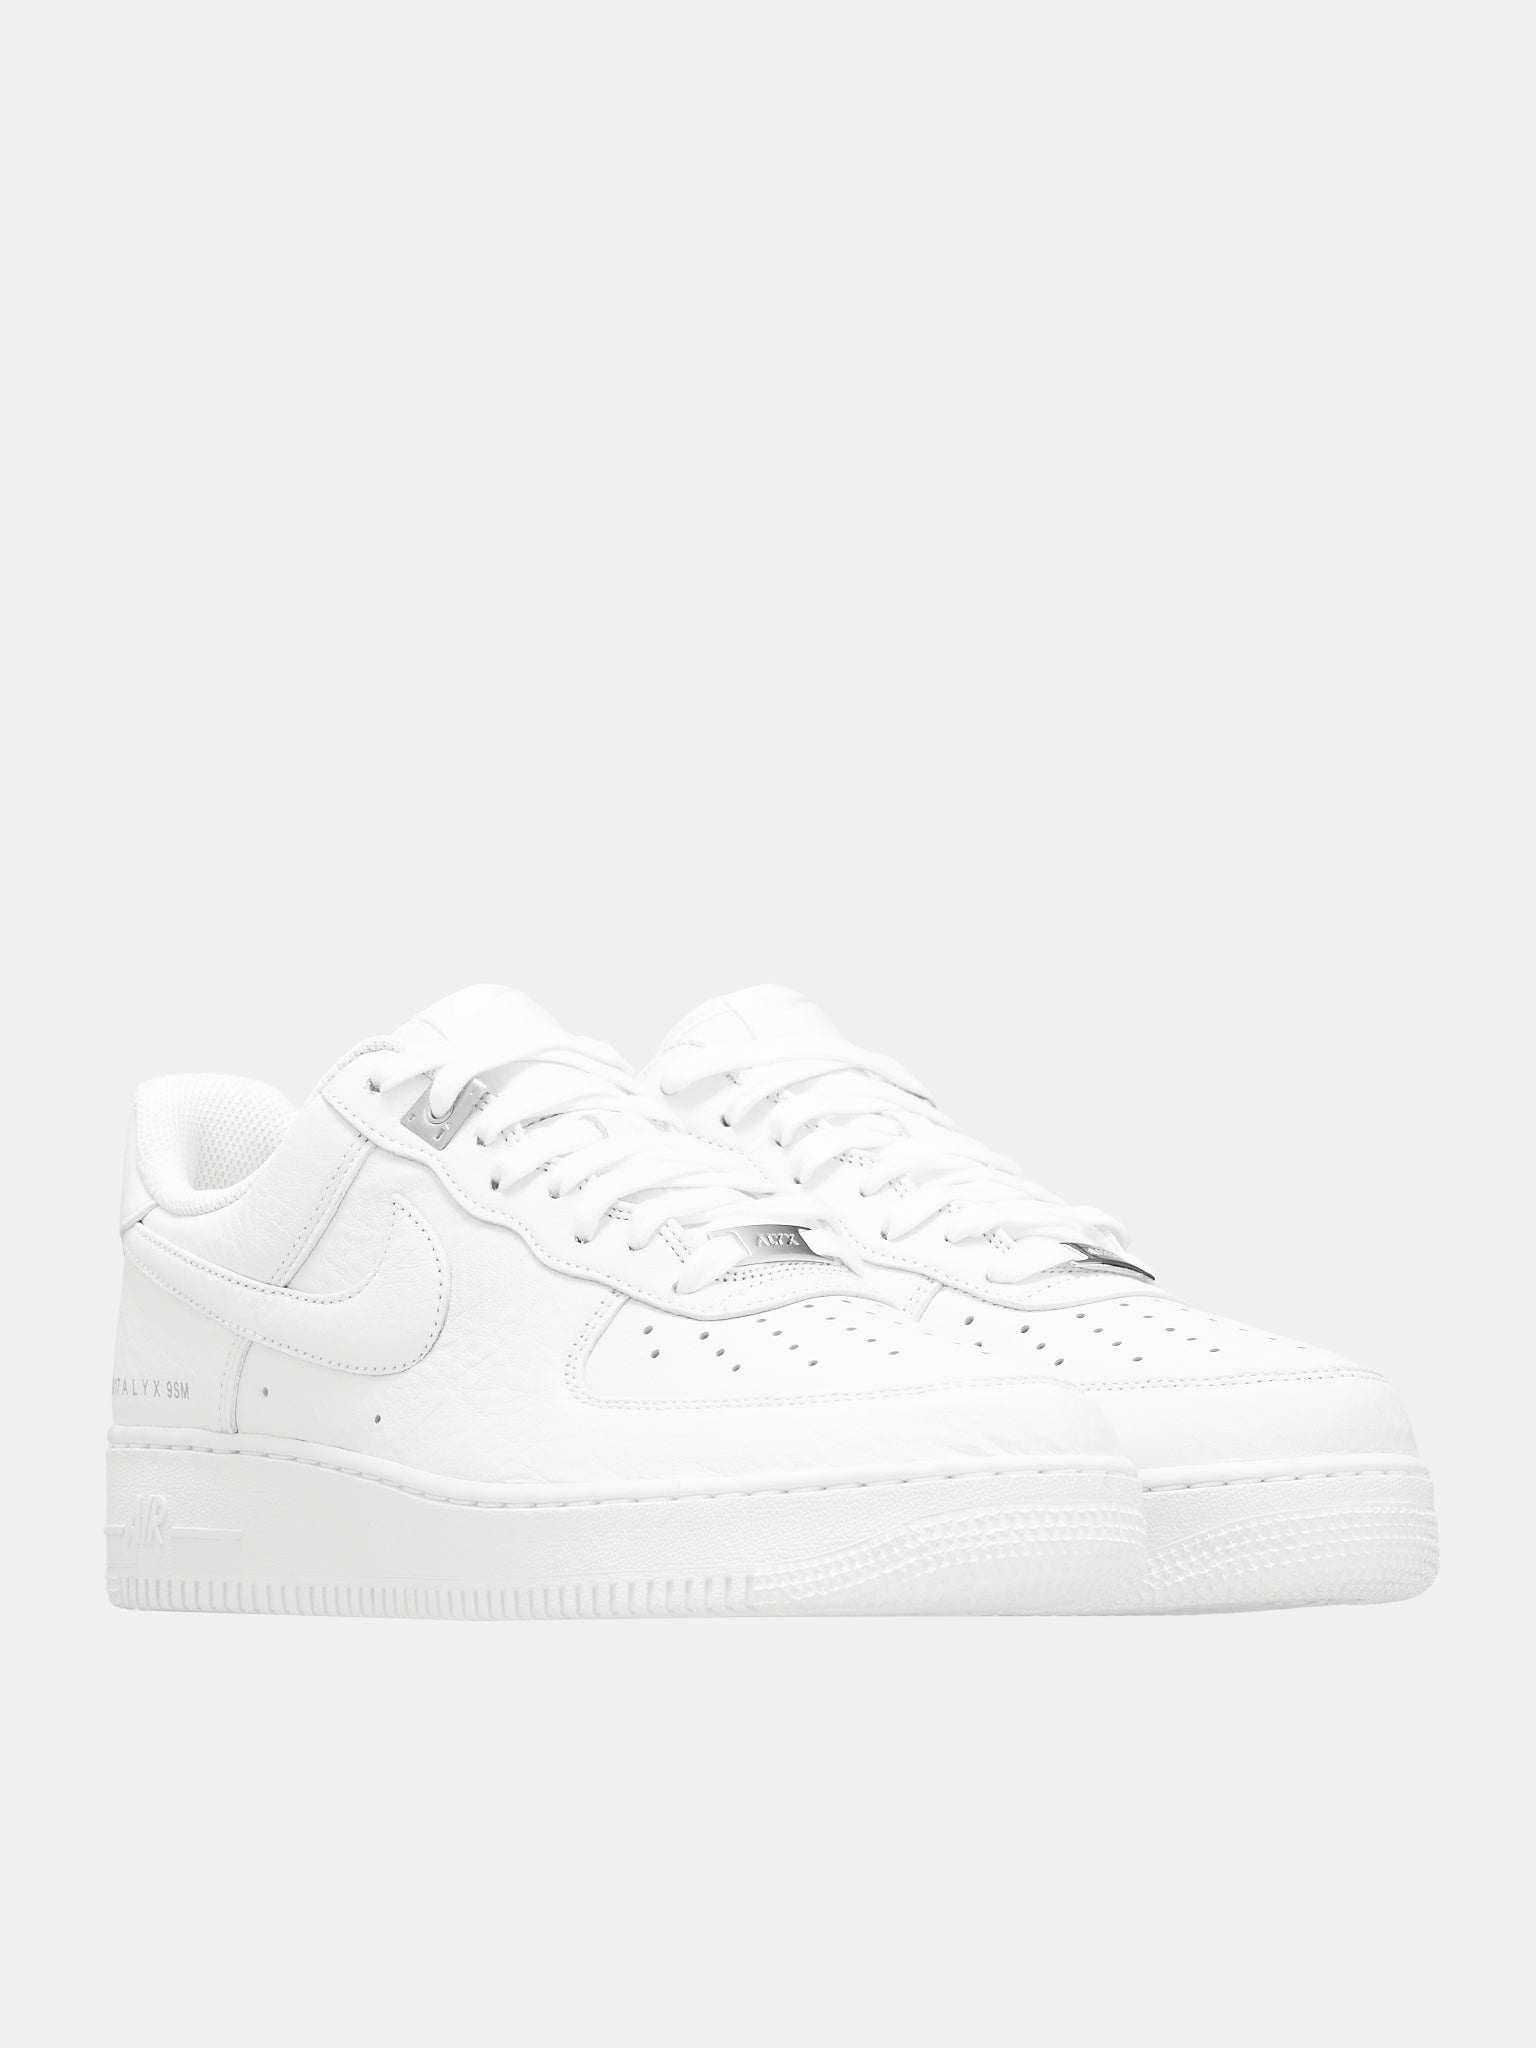 Alyx Air Force 1 Low - 2